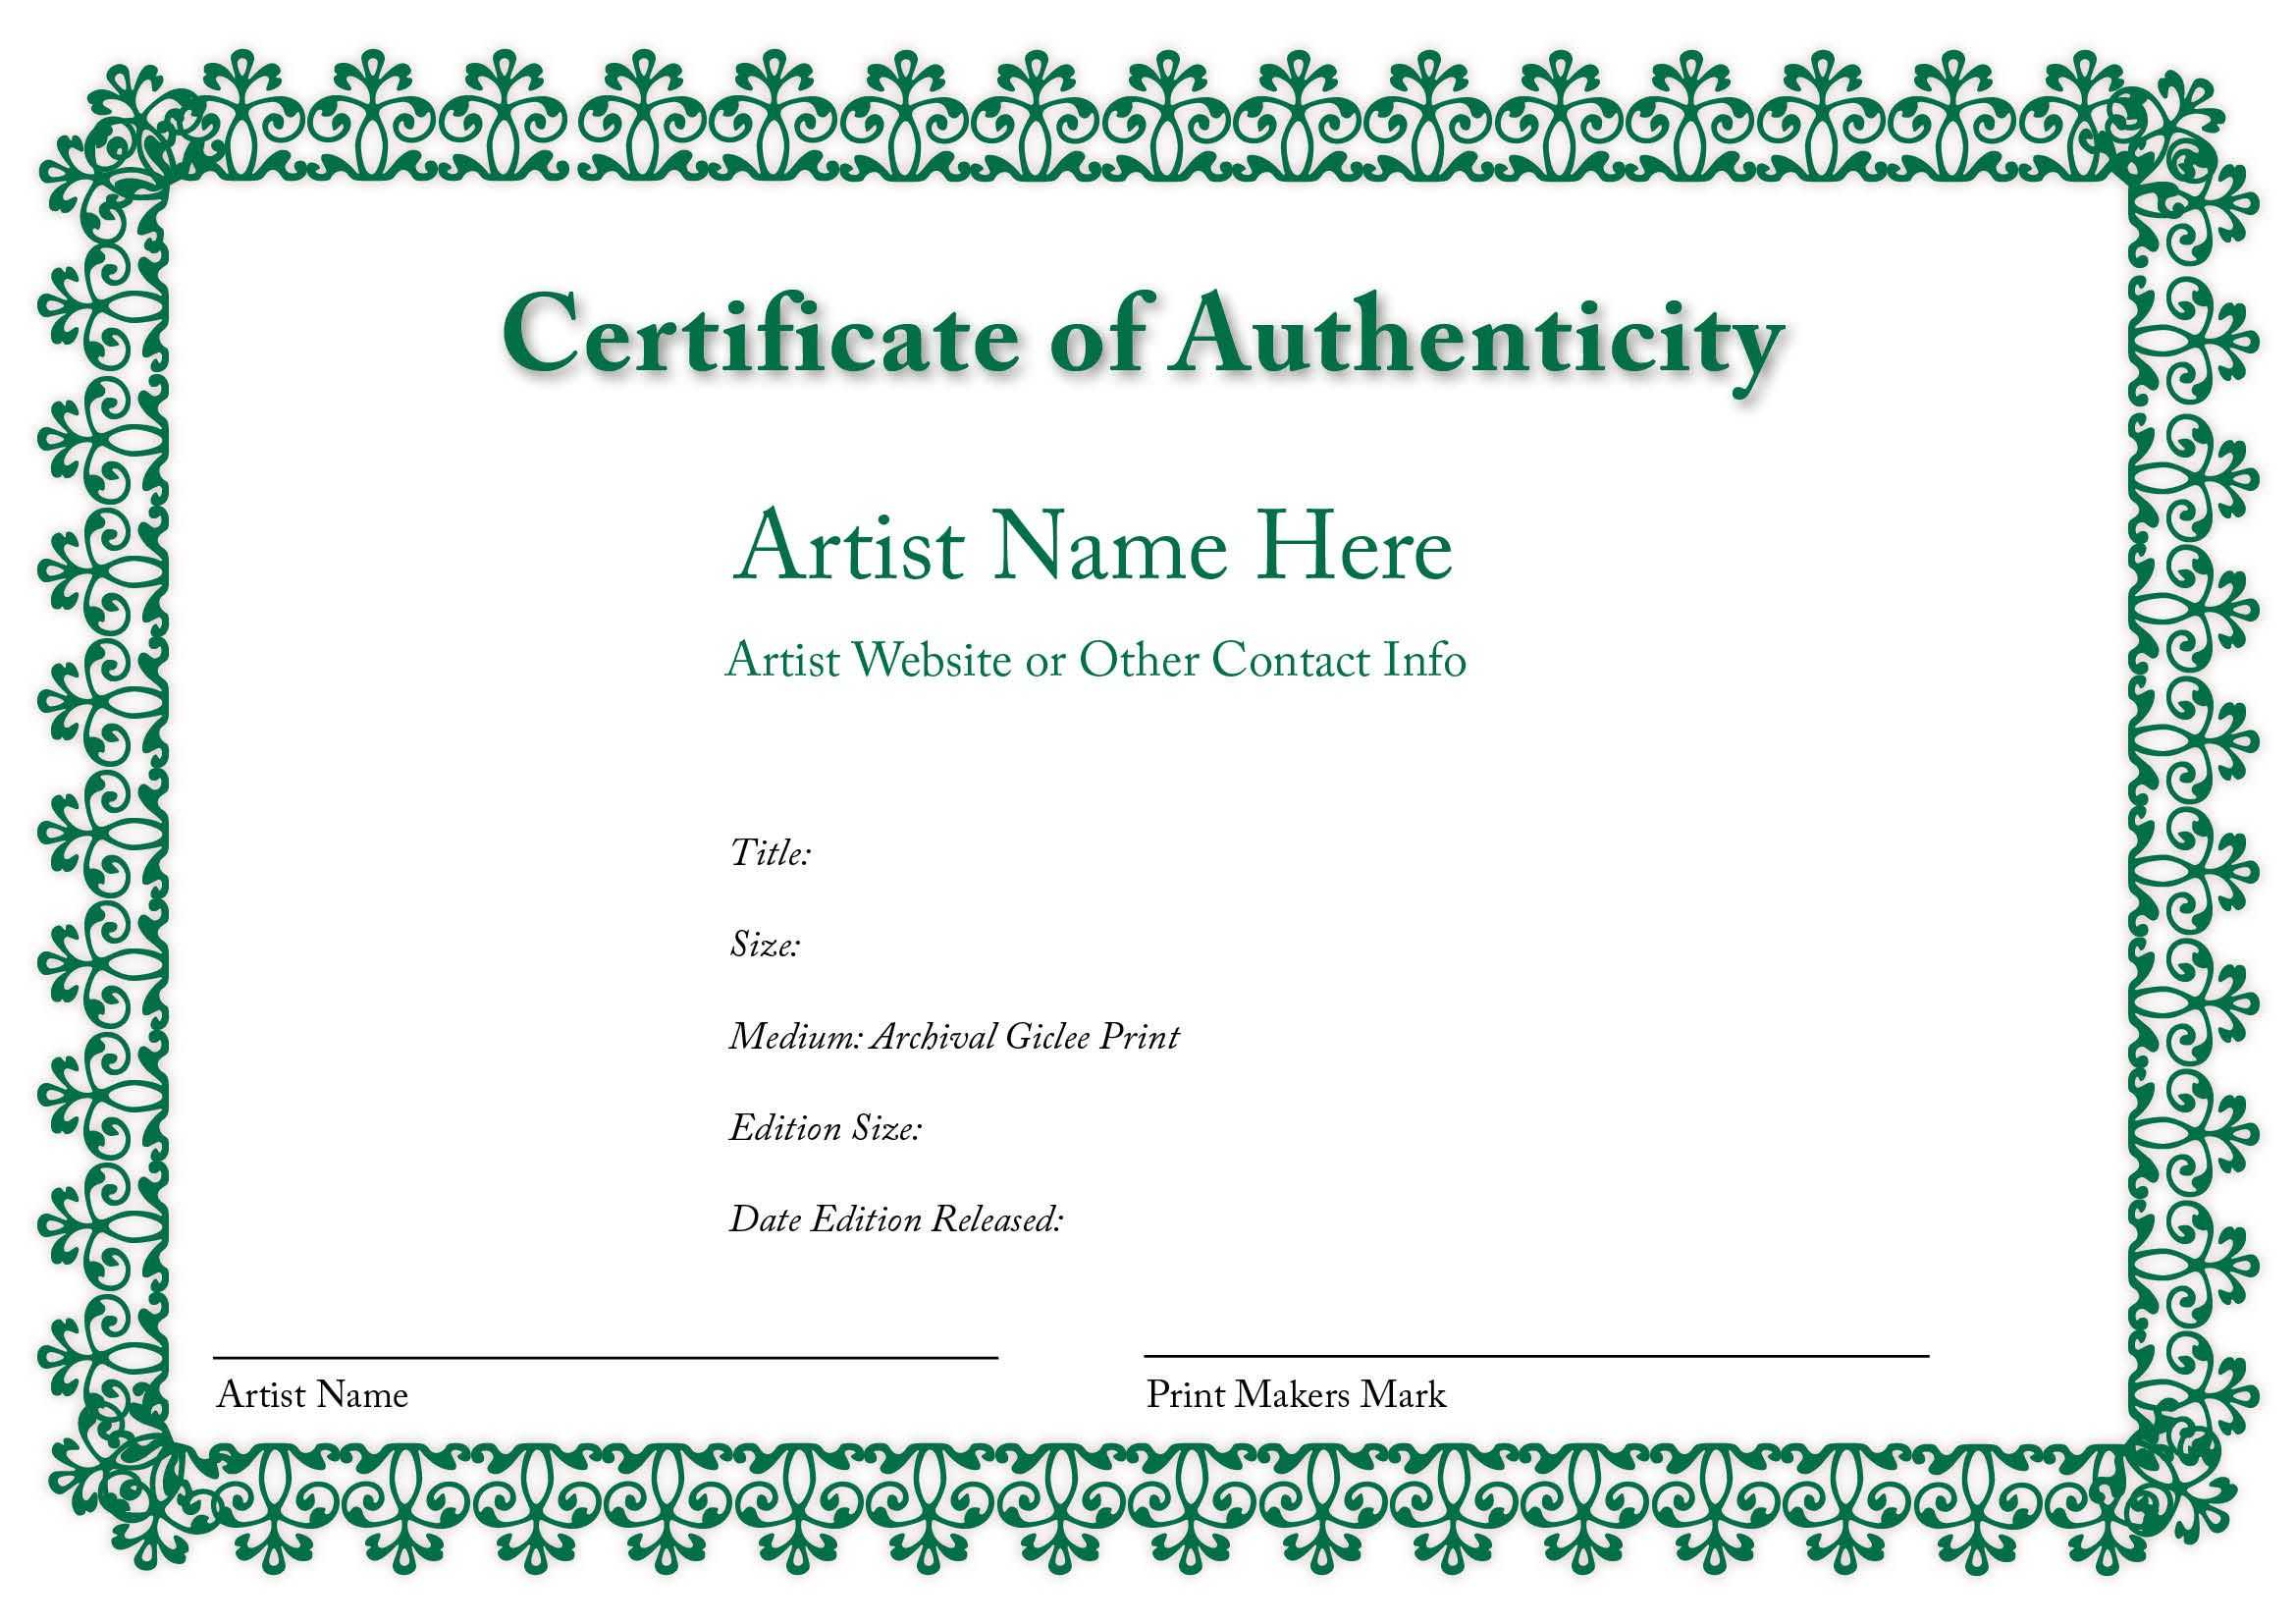 Certificate Of Authenticity Of An Art Print In 2019 Throughout Certificate Of Authenticity Photography Template